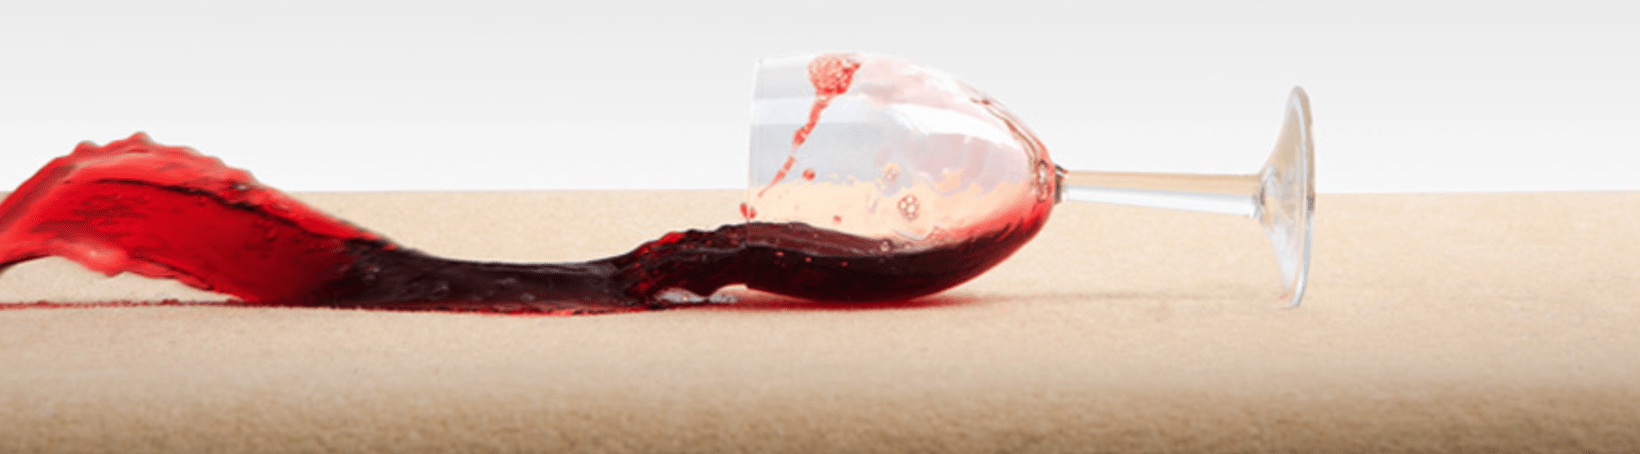 wine spill on rug | wine stain | cleaning stain on rug